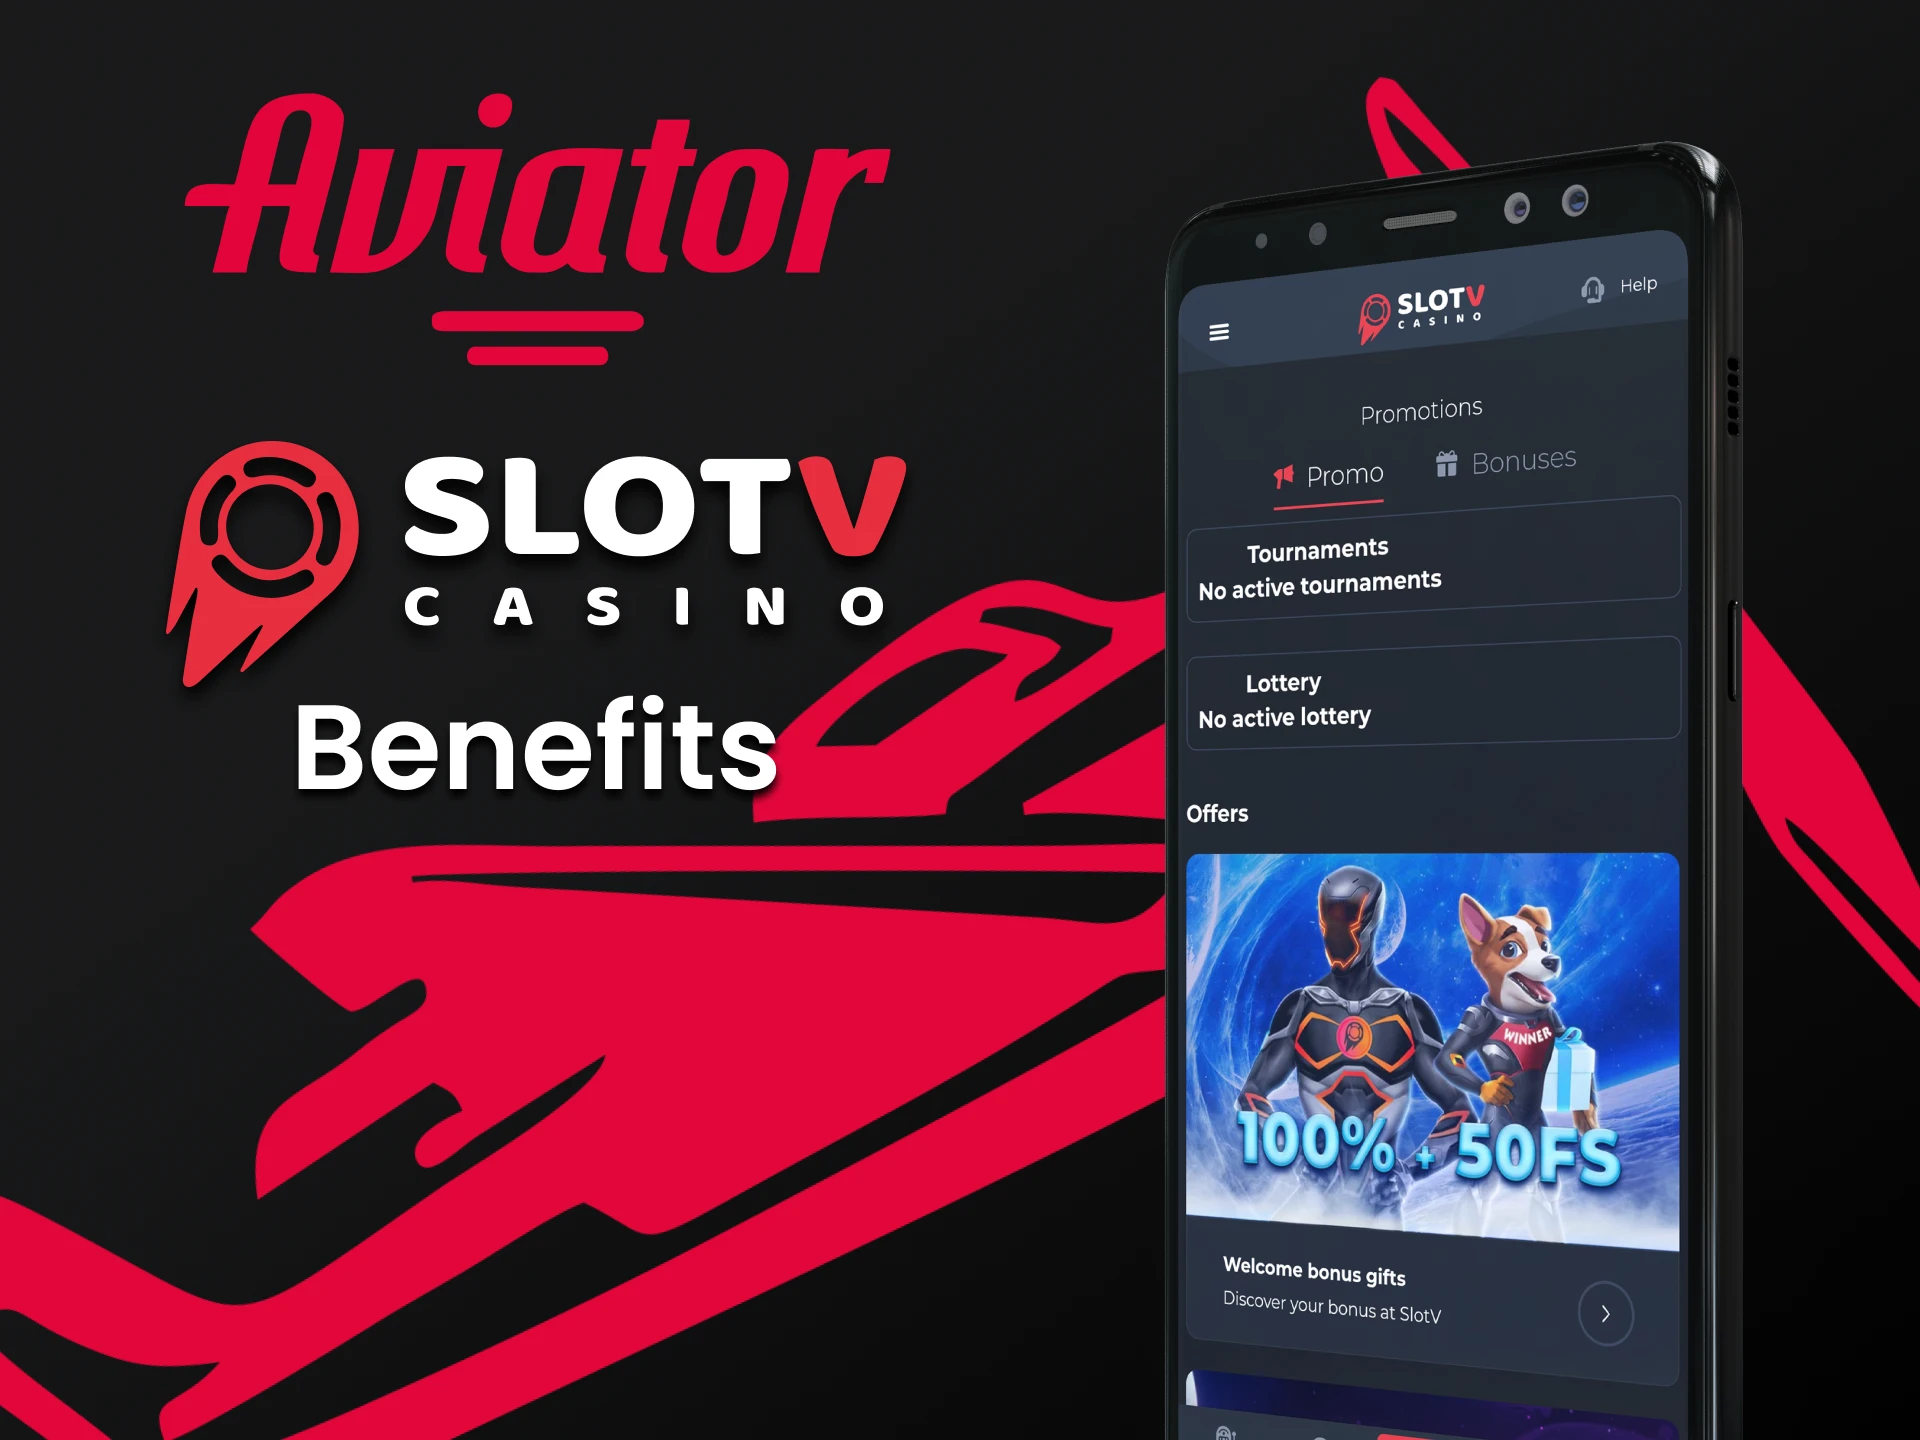 The SlotV app has many benefits for playing Aviator.